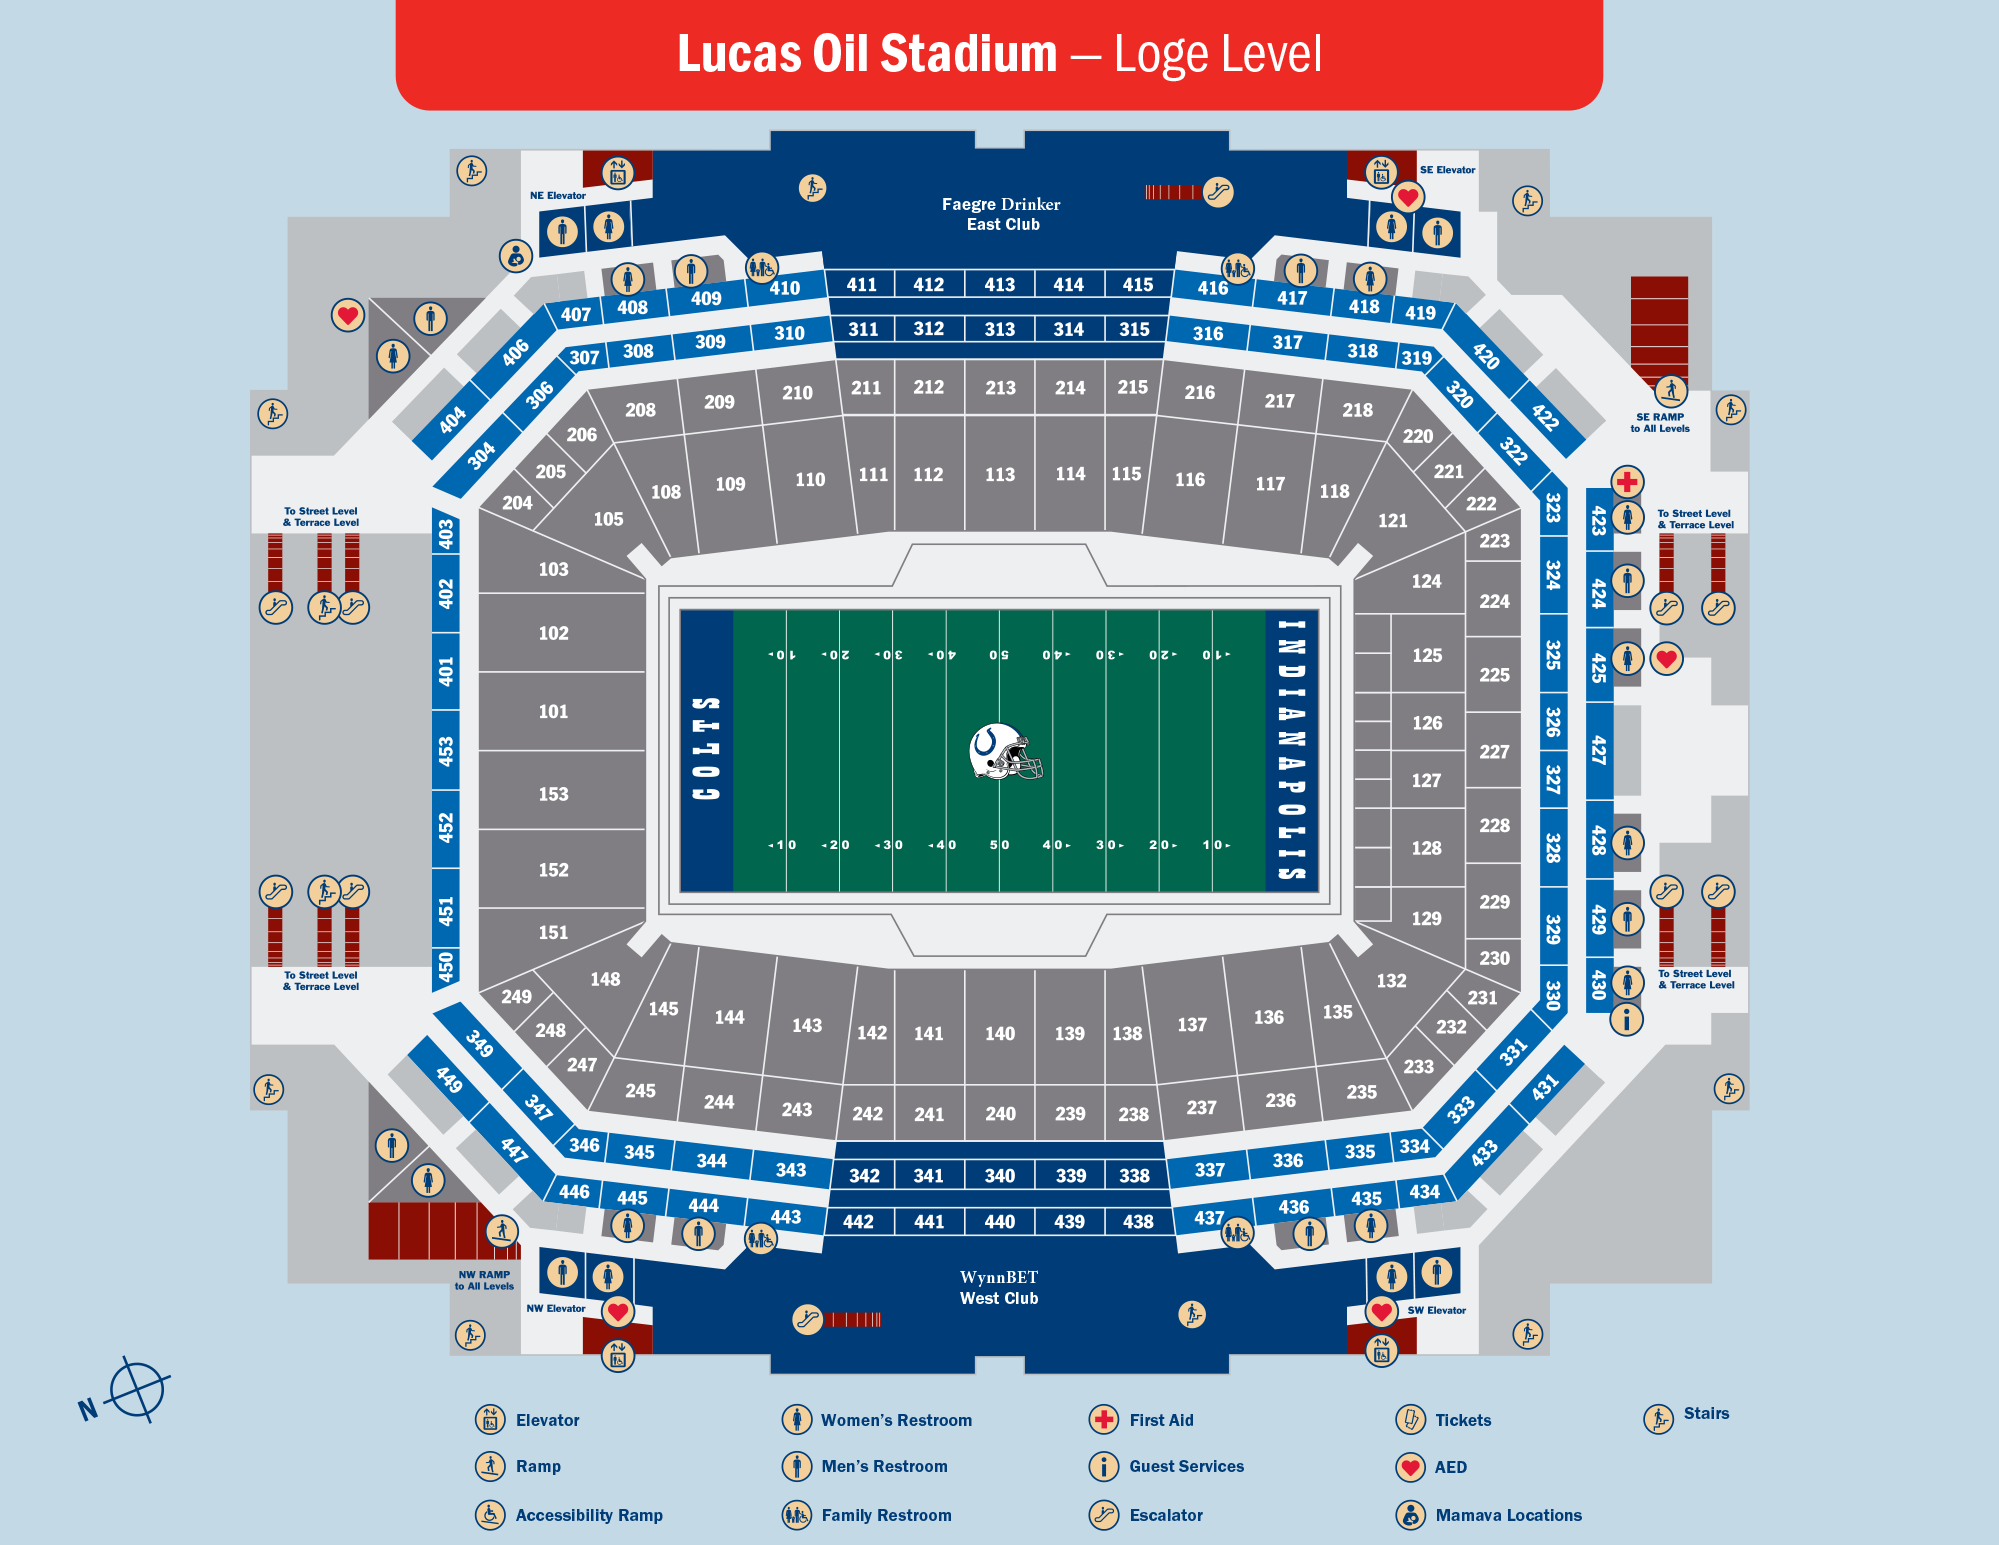 Indianapolis Colts at Lucas Oil Stadium Tickets & Game Day Information